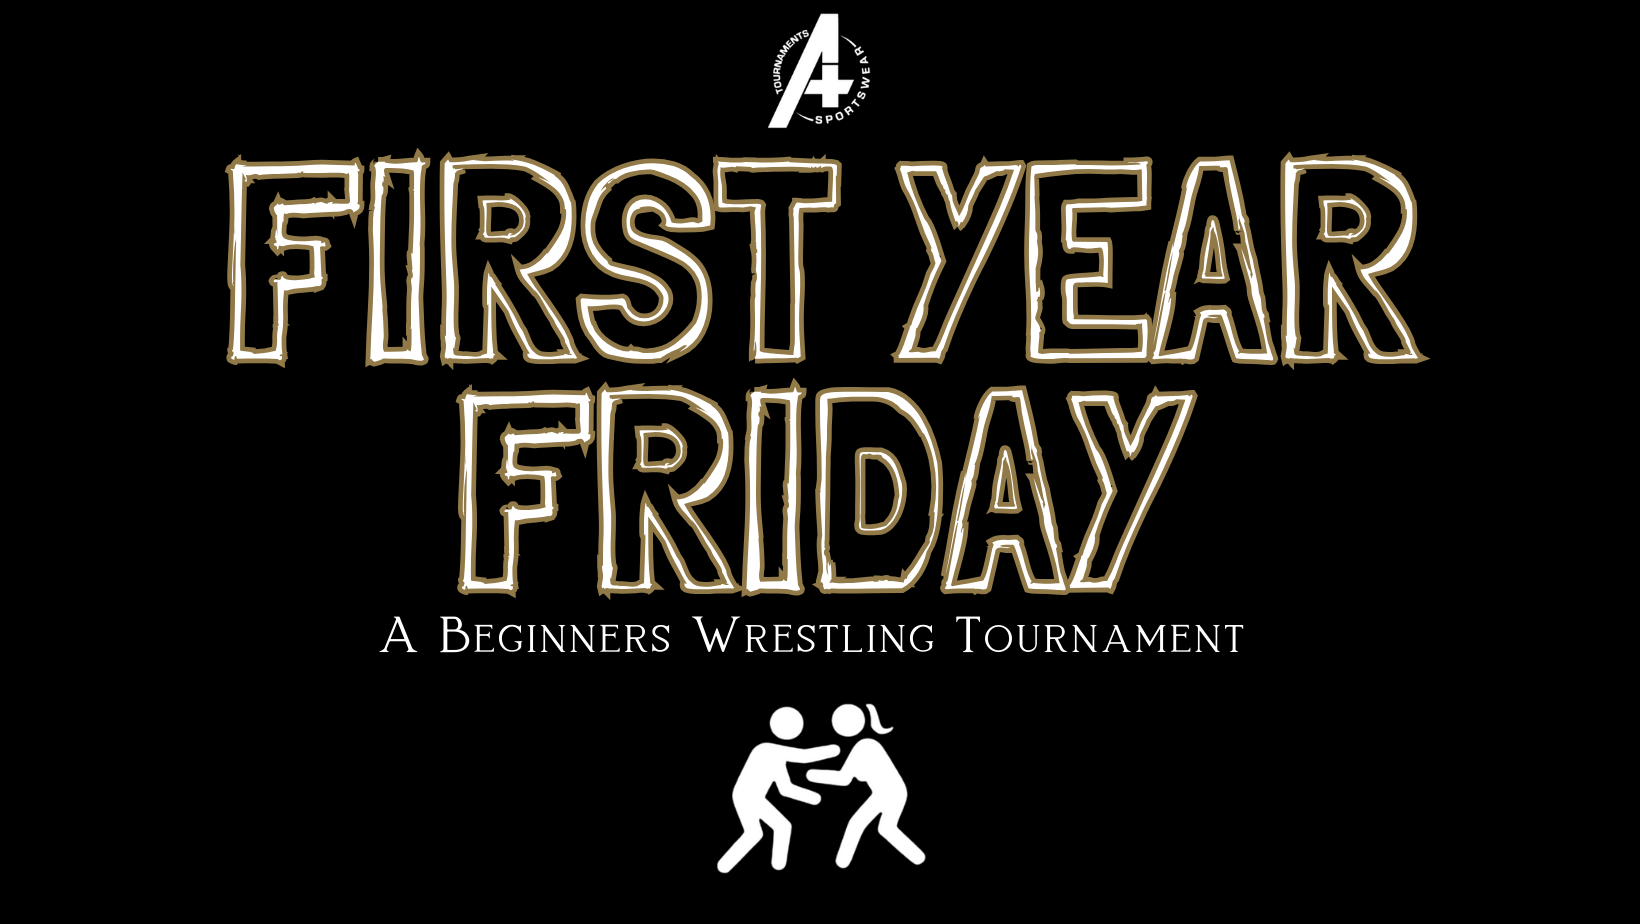 First Year Friday